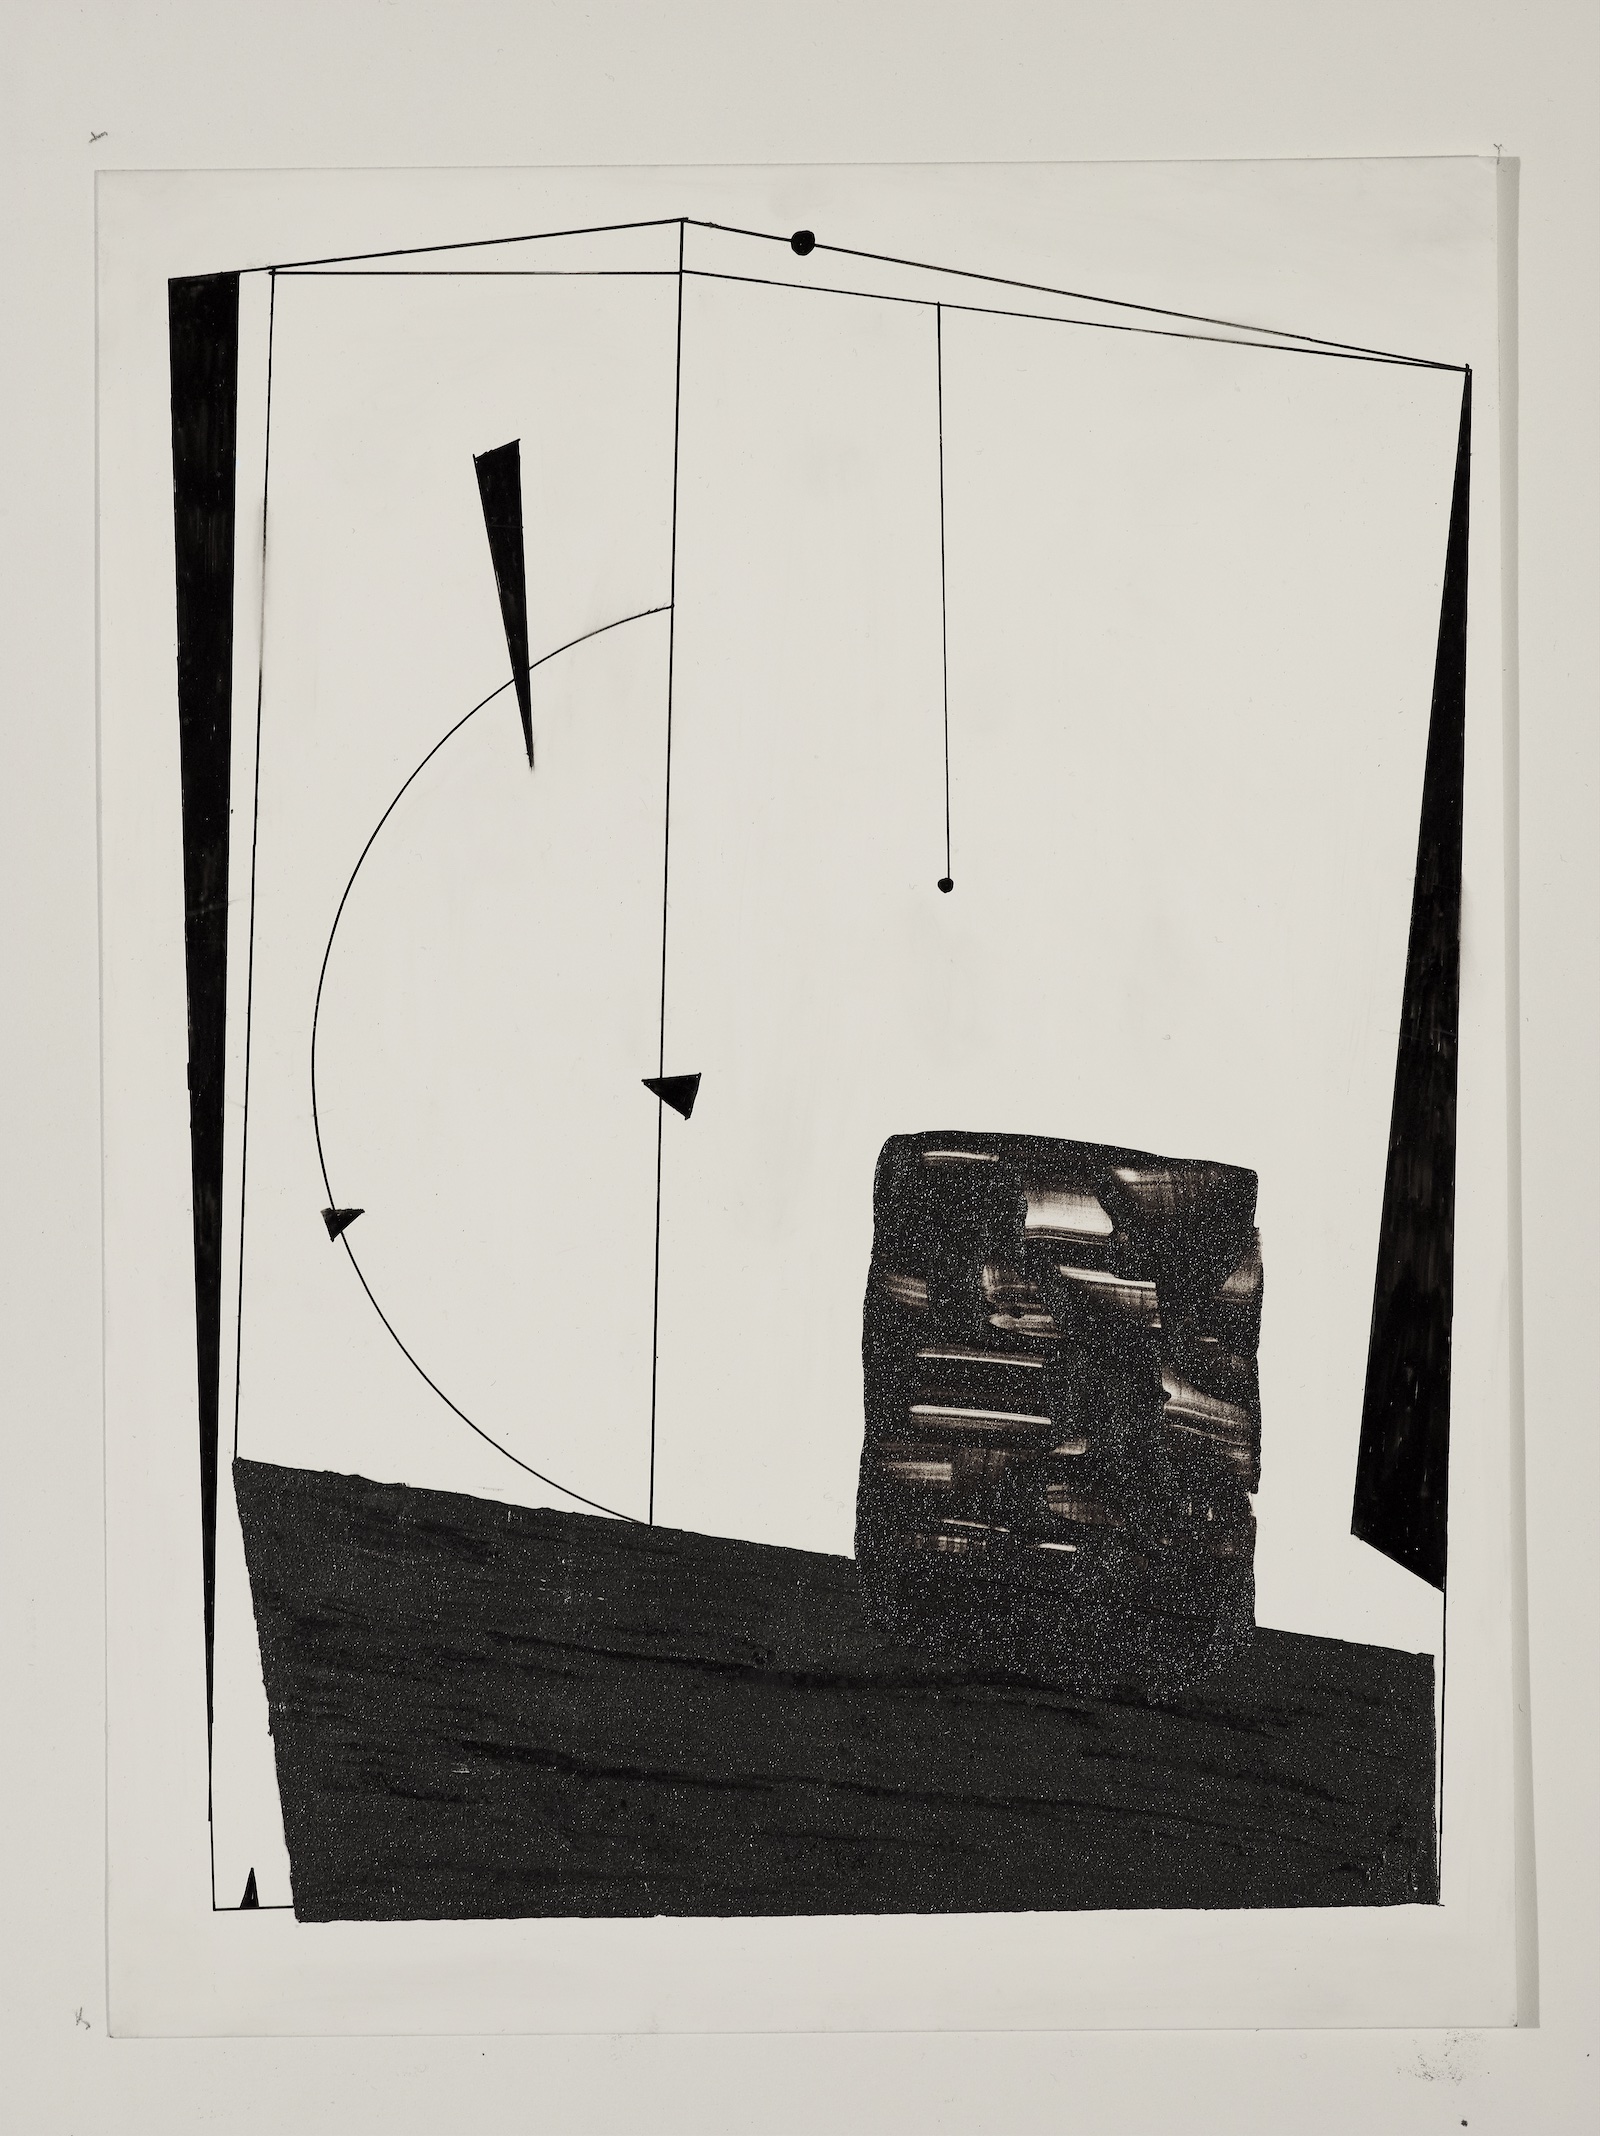 A black-and-white abstract drawing